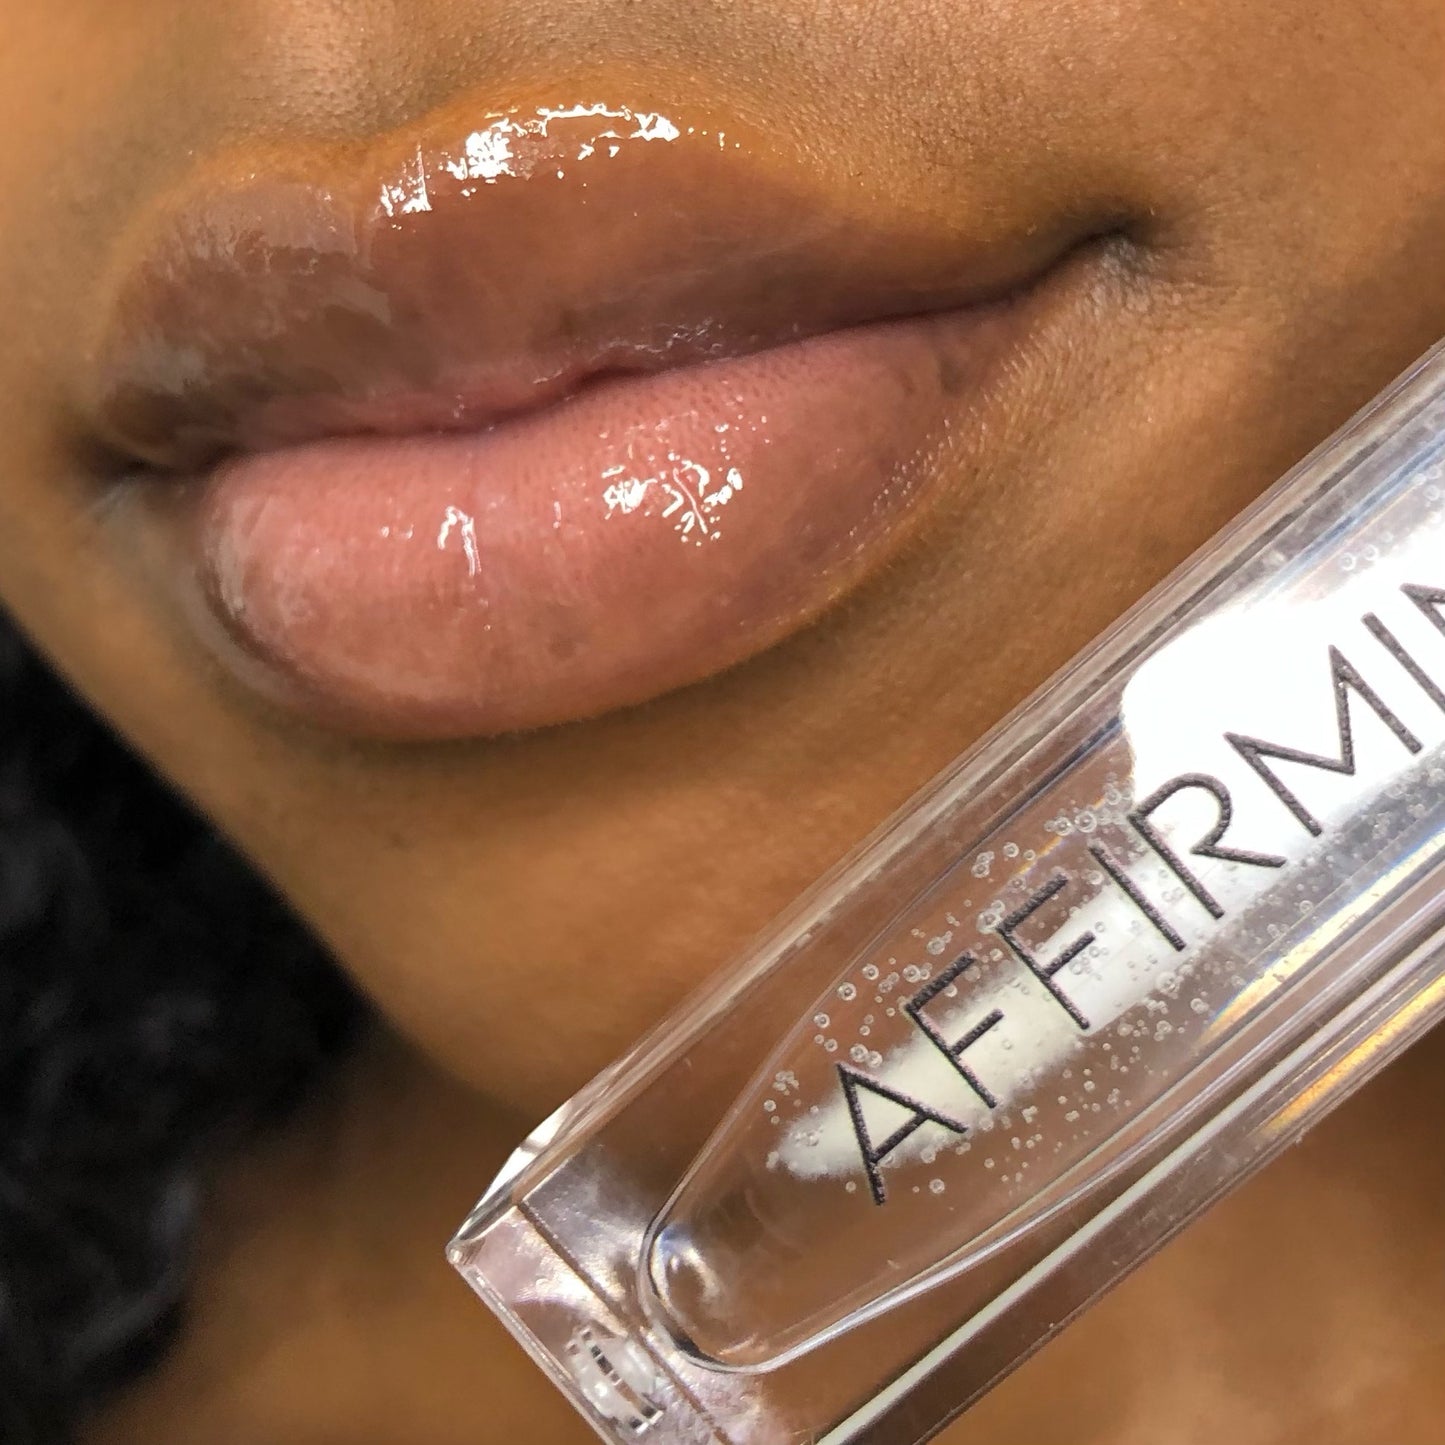 "Clear Vision" Ultra-Hydrating Lipgloss